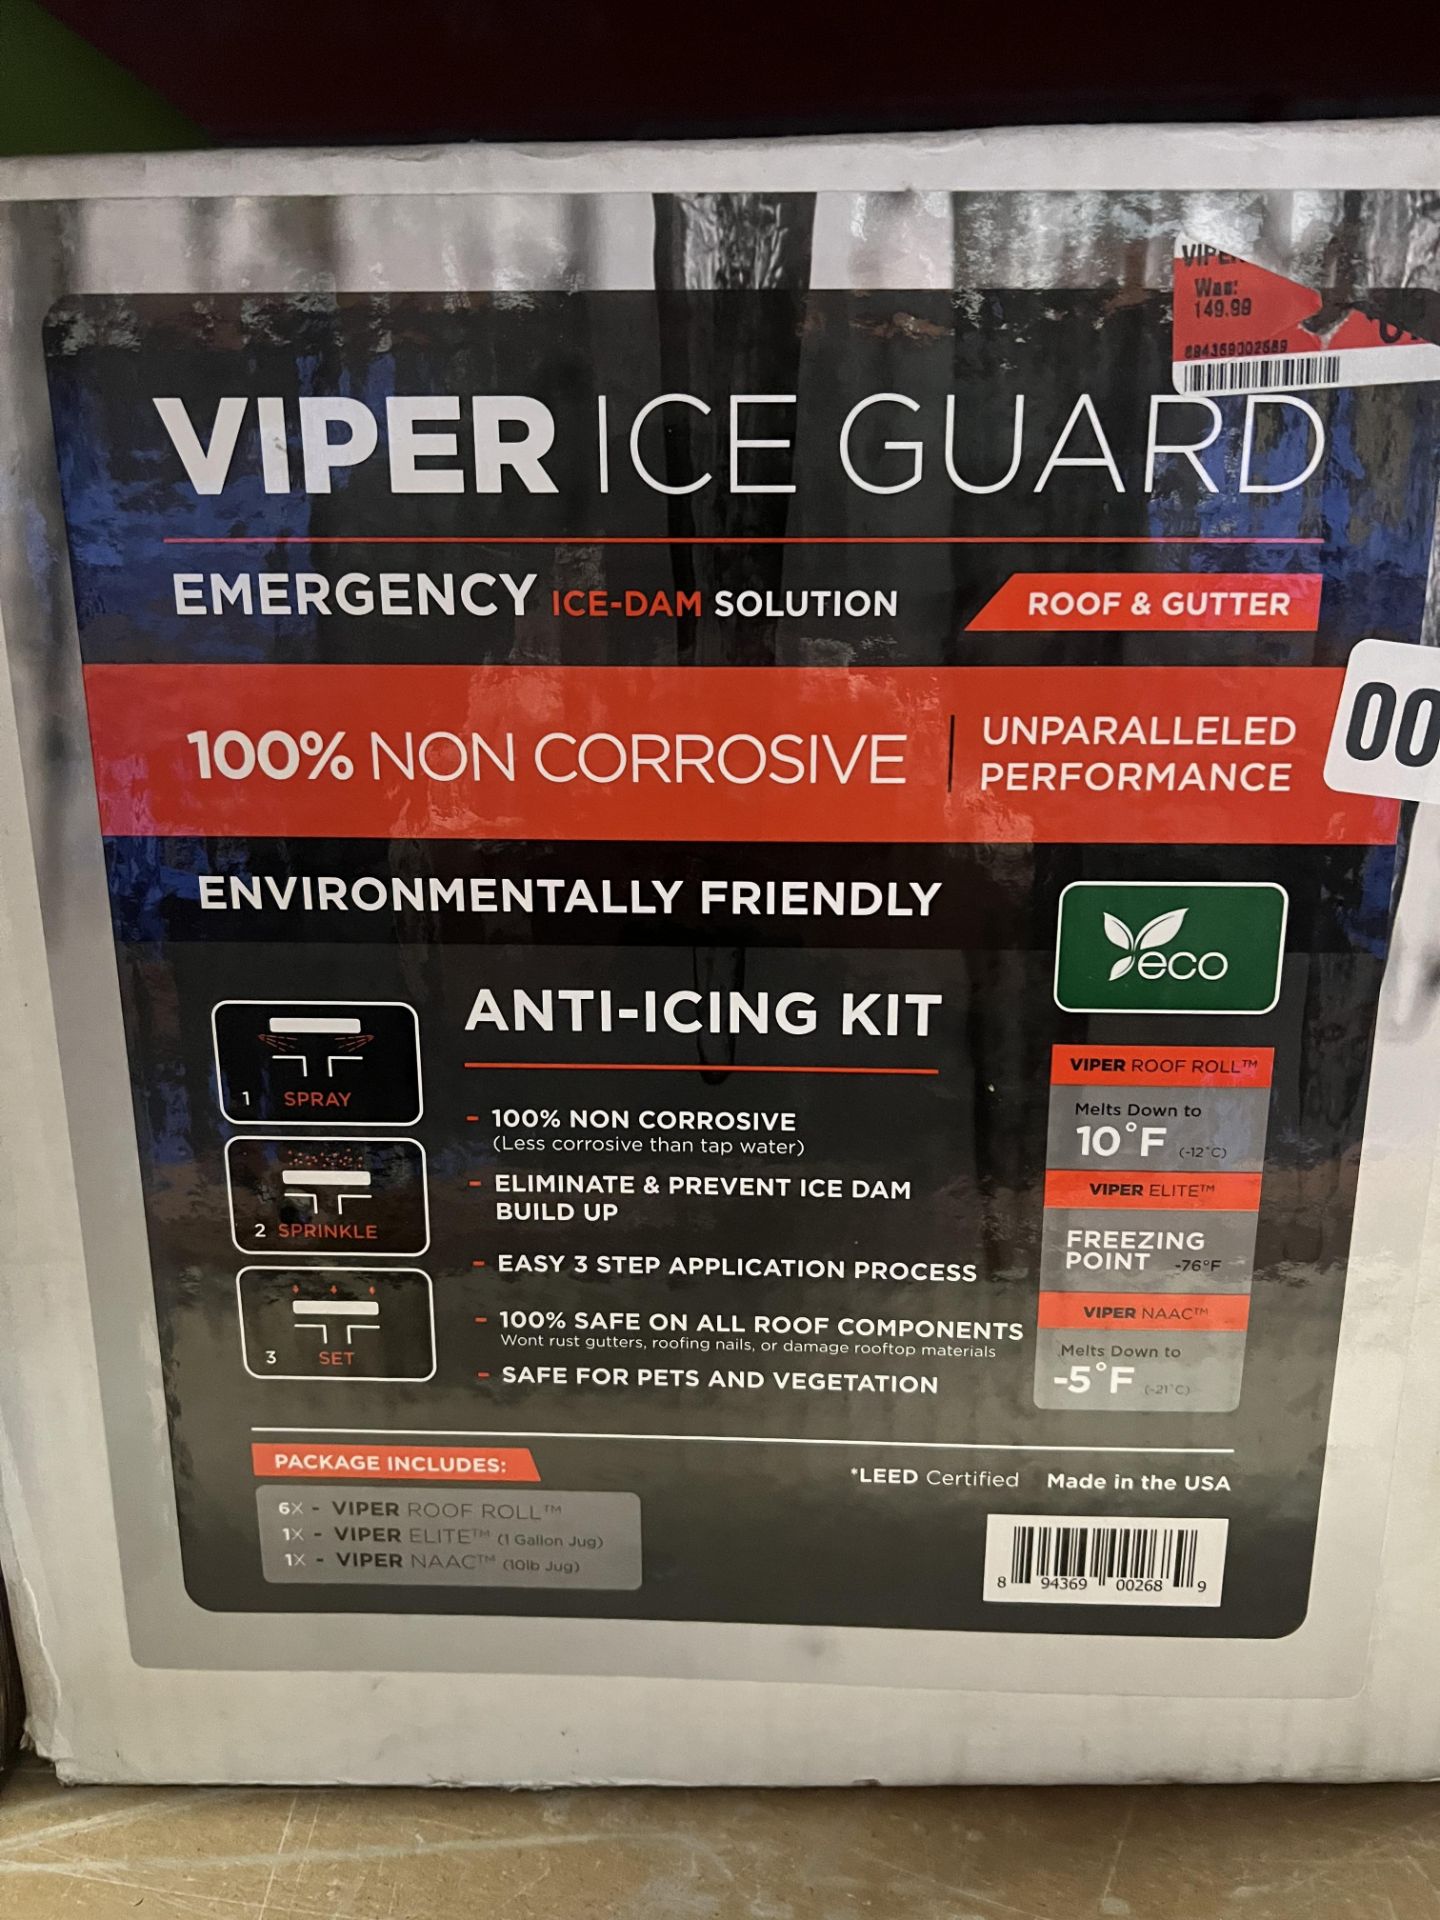 Lot of Viper IceGuard Roof and Gutter Protection - Image 2 of 3